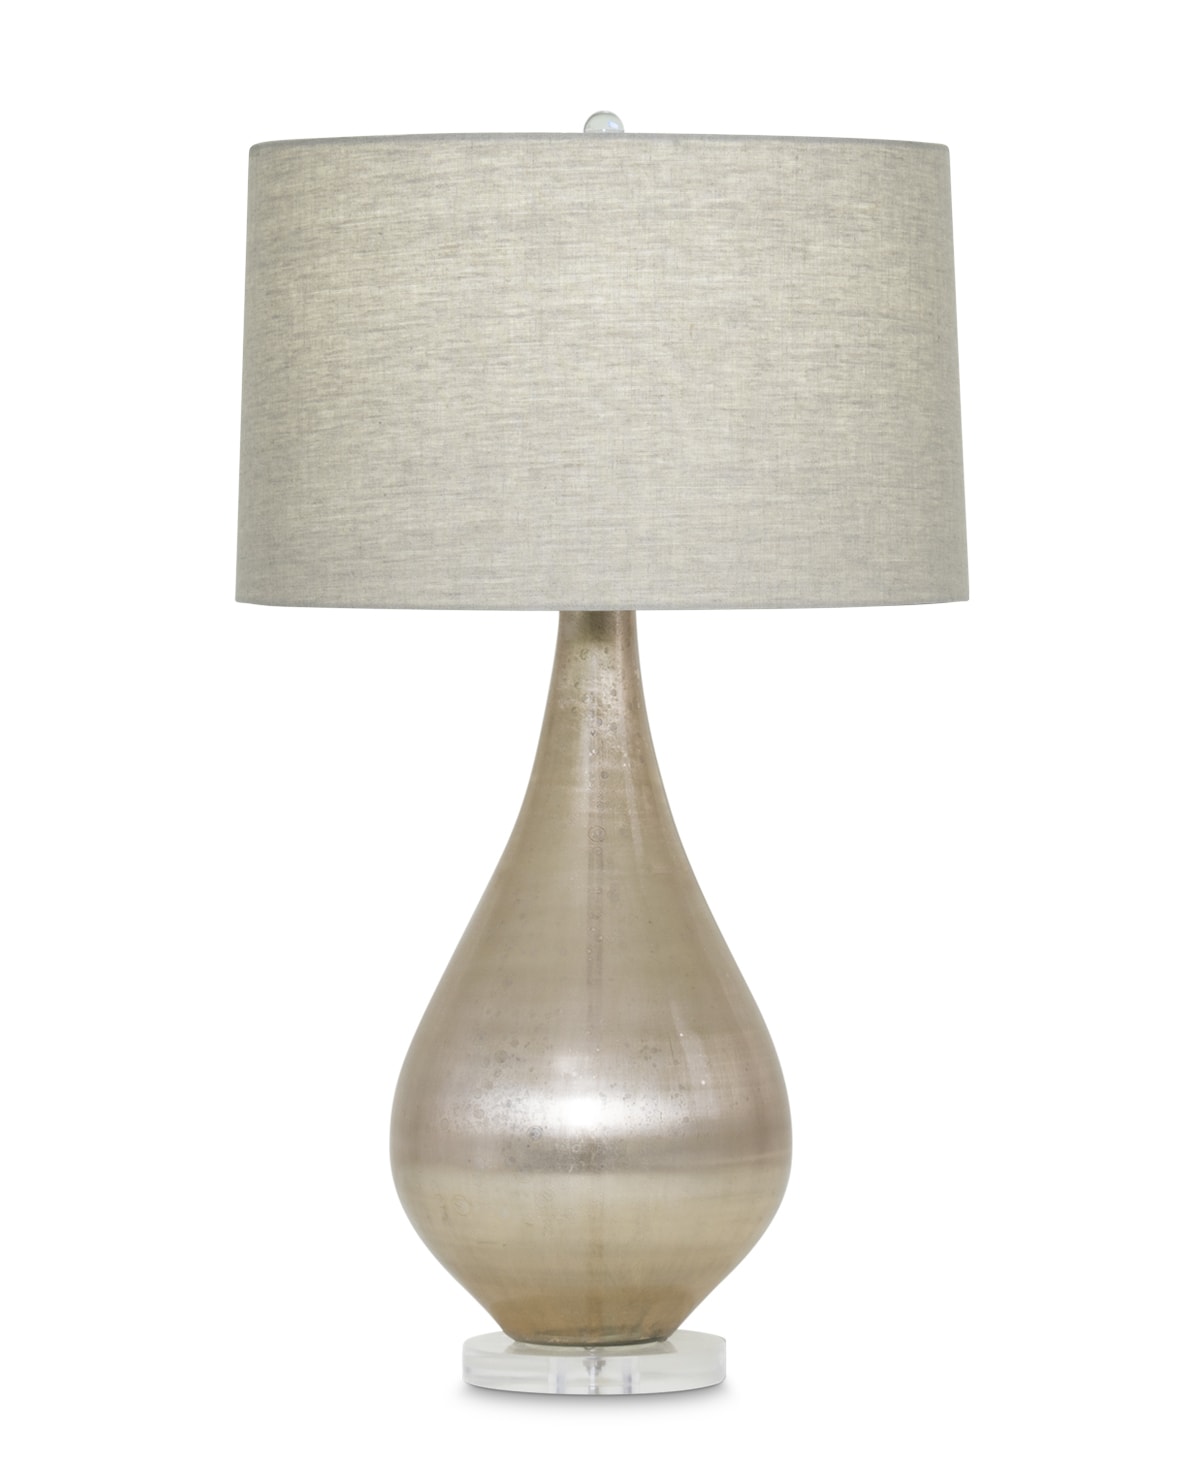 FlowDecor Holland Table Lamp in mouth-blown glass with beige metallic finish and acrylic base and beige linen tapered drum shade (# 3905)